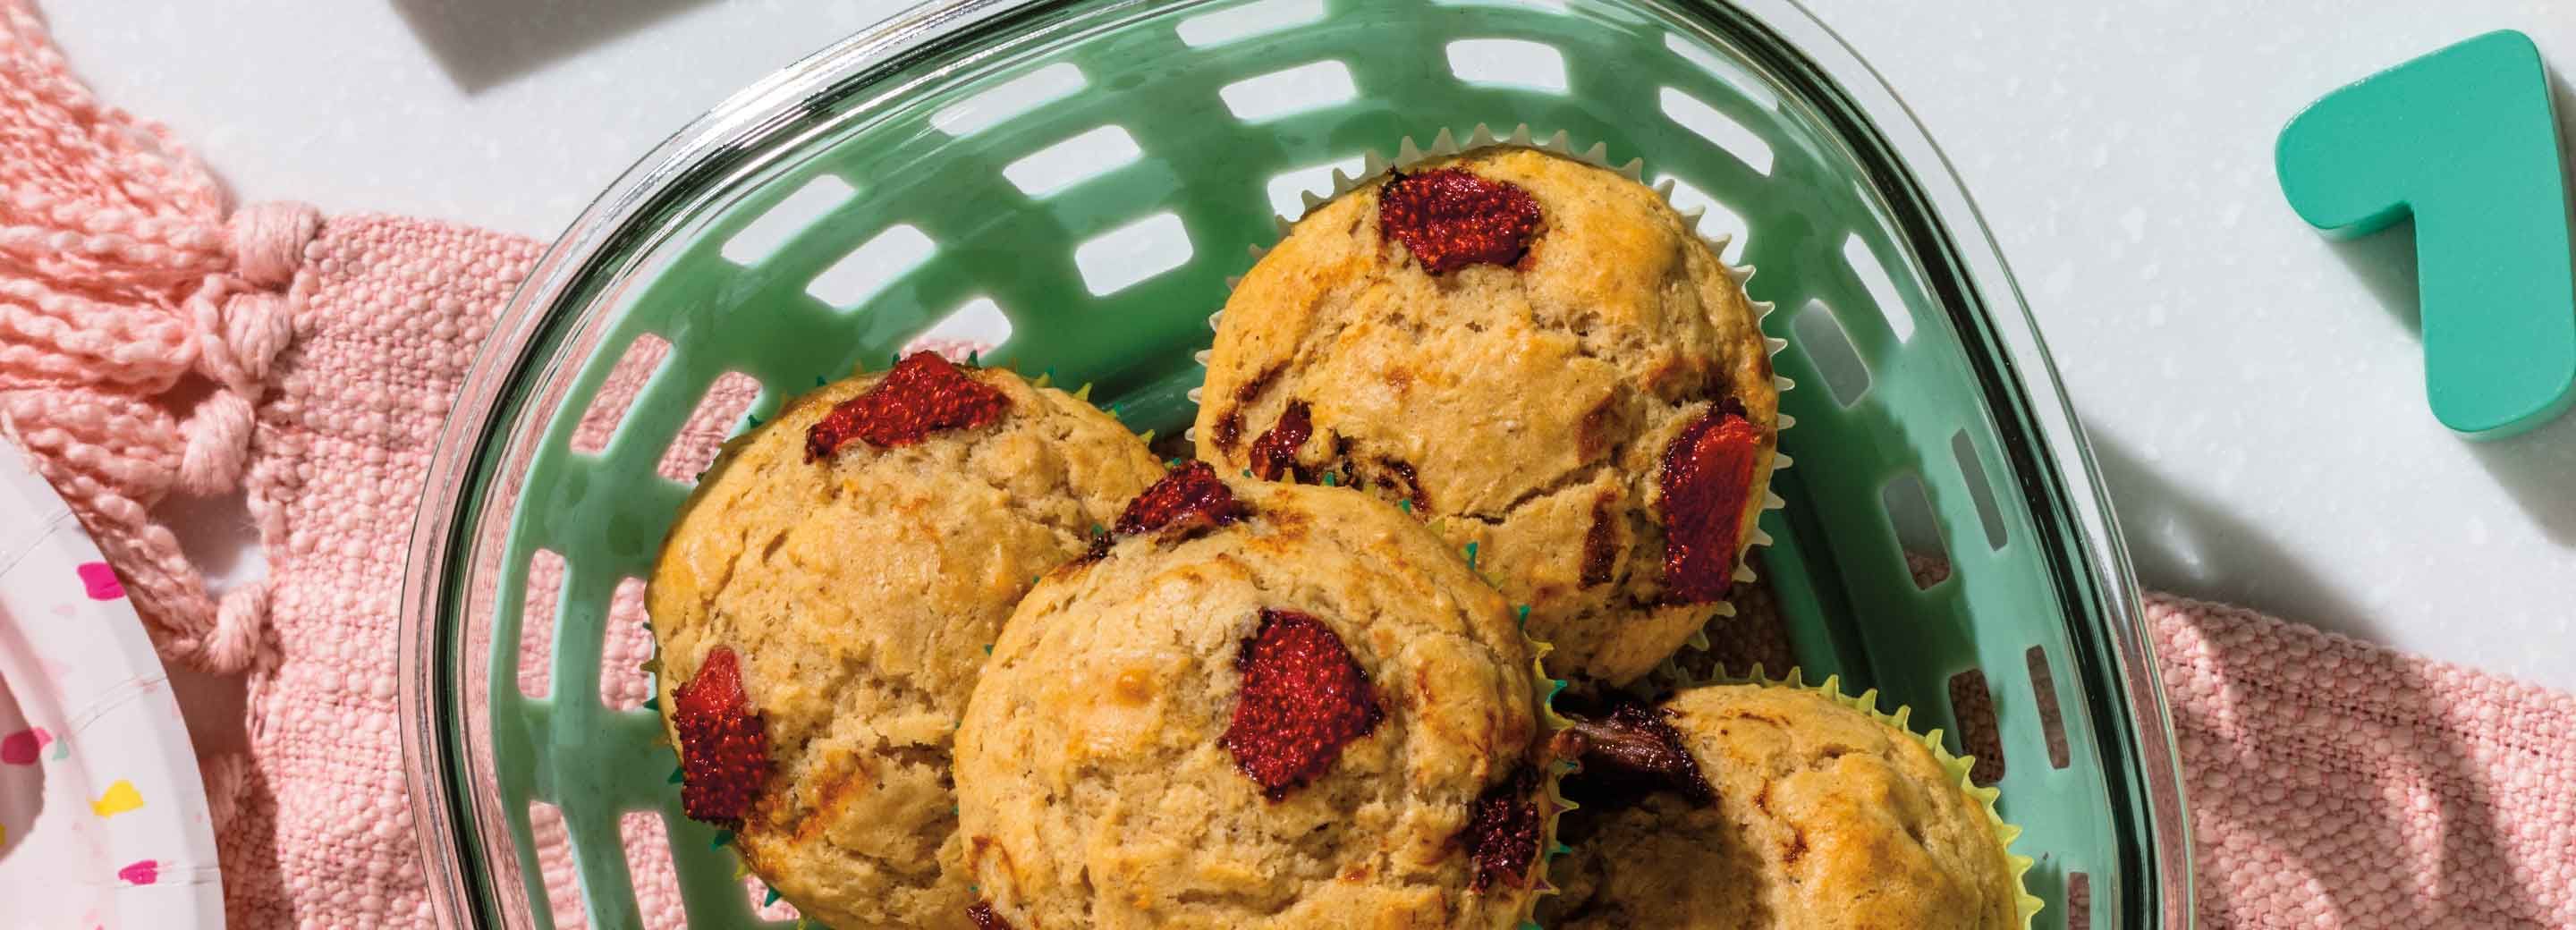 Mighty Peanut Butter & Strawberry Muffins